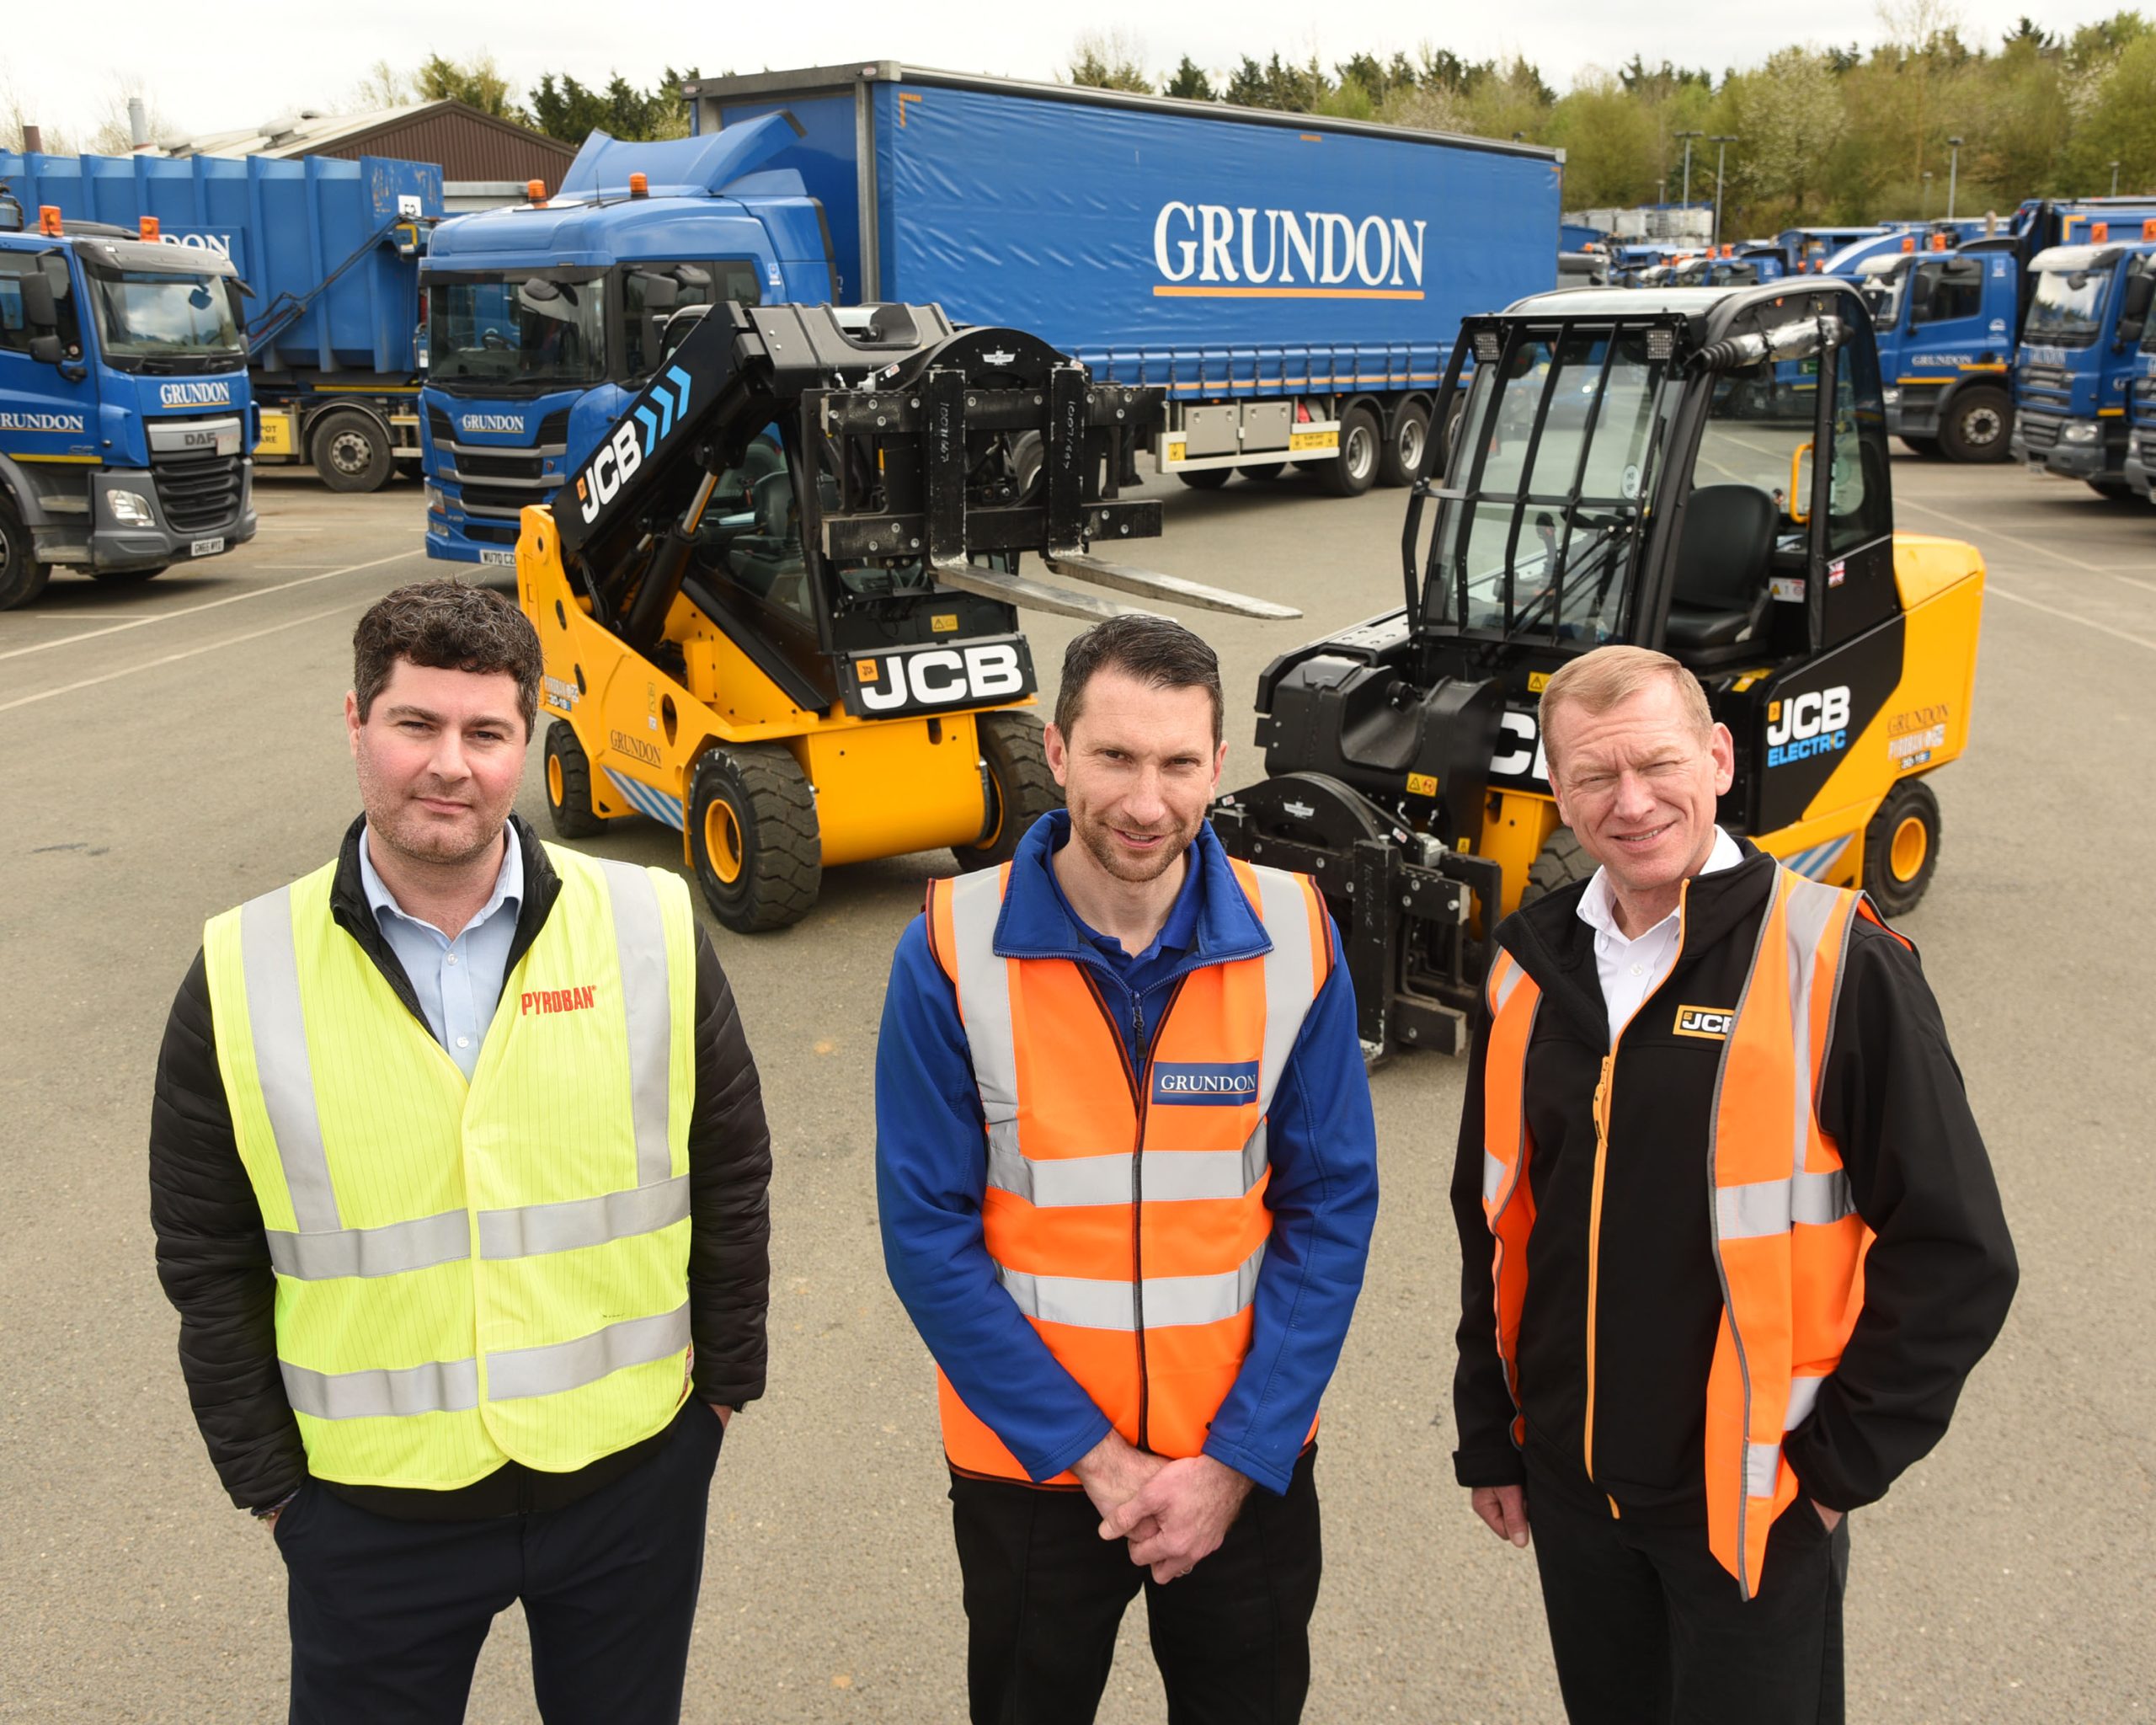 Pictured in front of the new electric Teletruk forklifts are (l-r) Matt Booth from Pyroban, Grundon’s Tim Buxton, and Brian Kumm, from Watling JCB